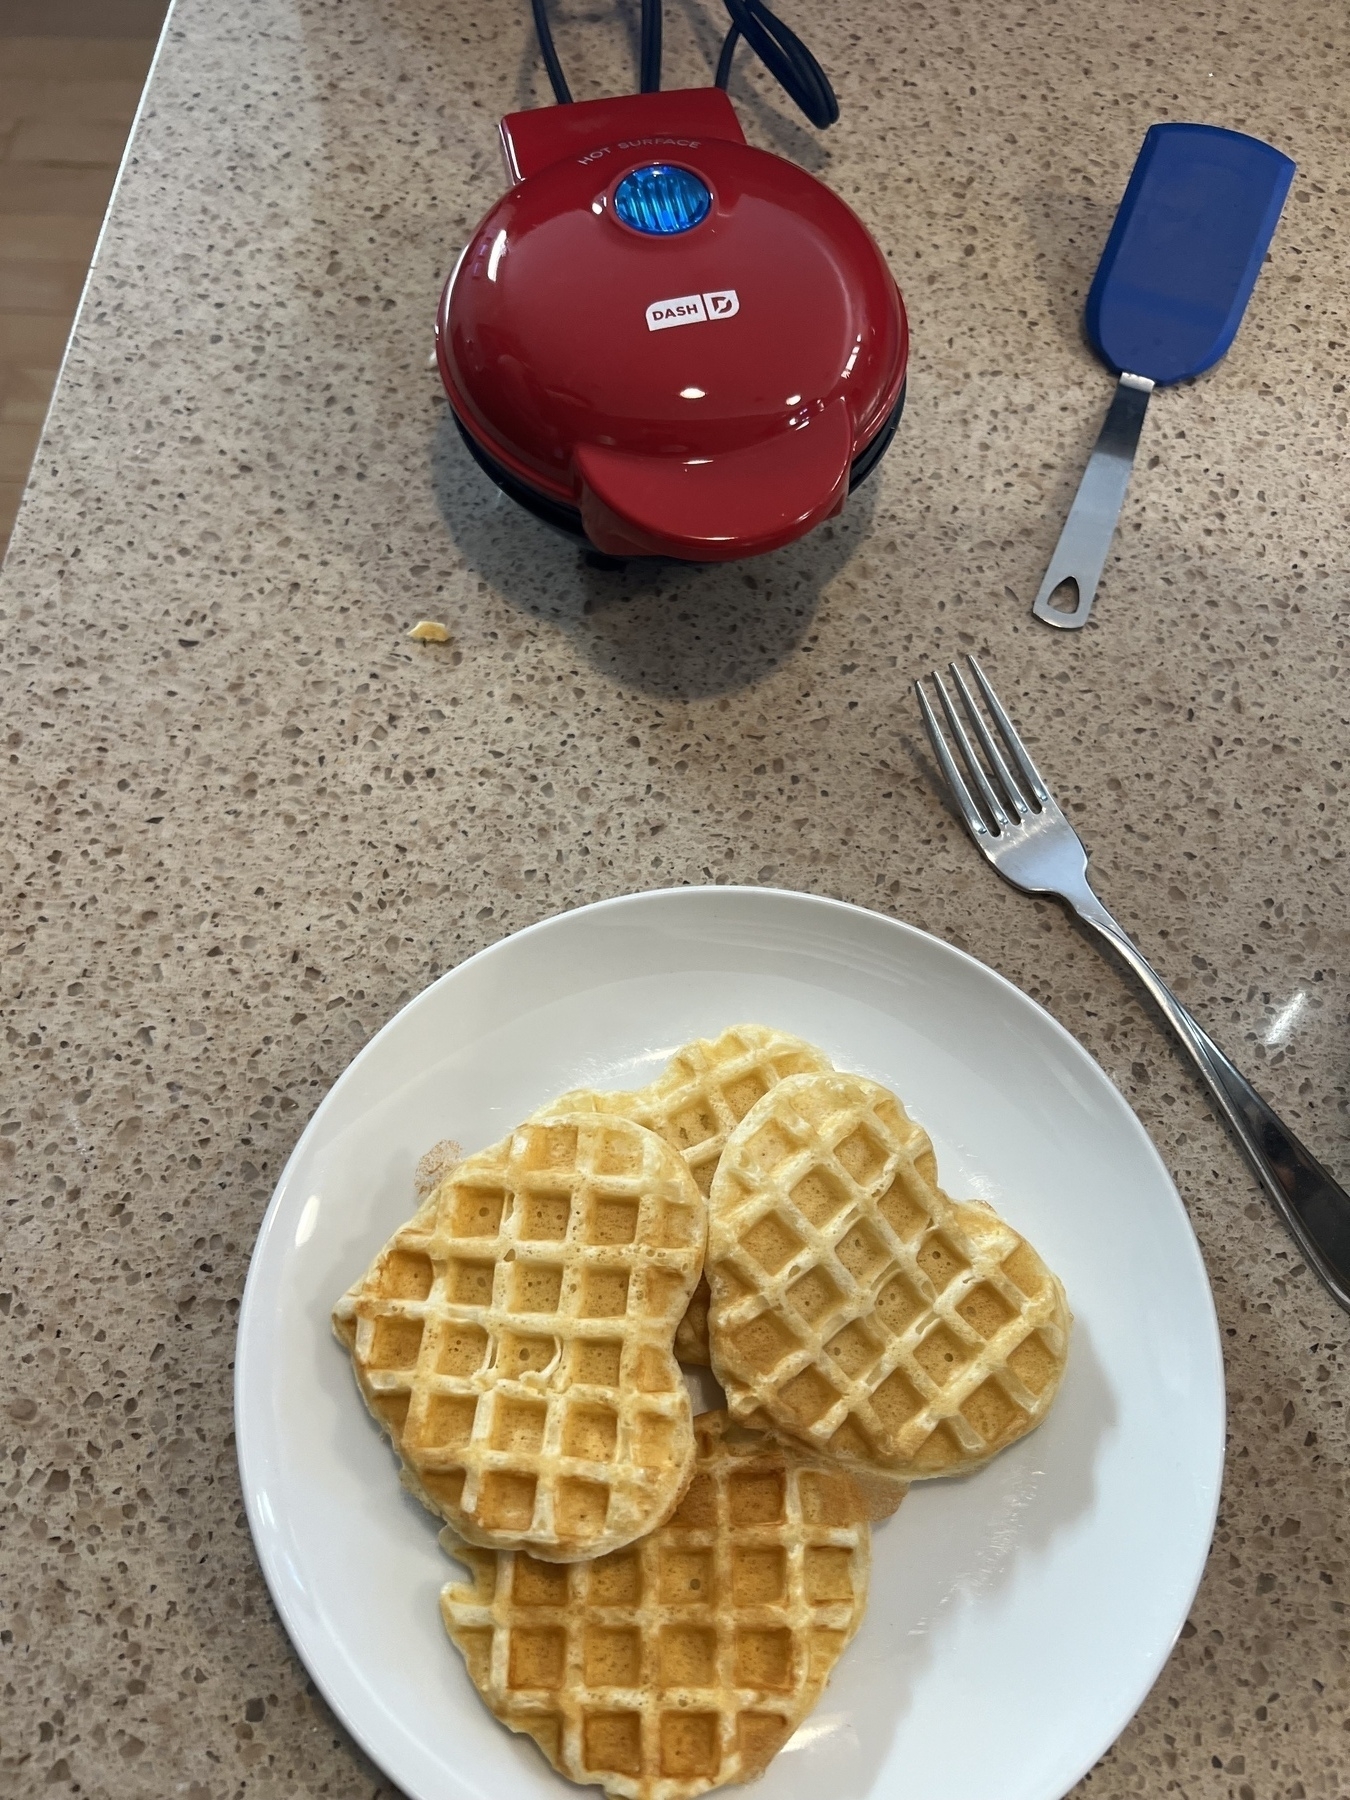 Heart shaped individual waffle maker with some waffles on a plate beside it. 